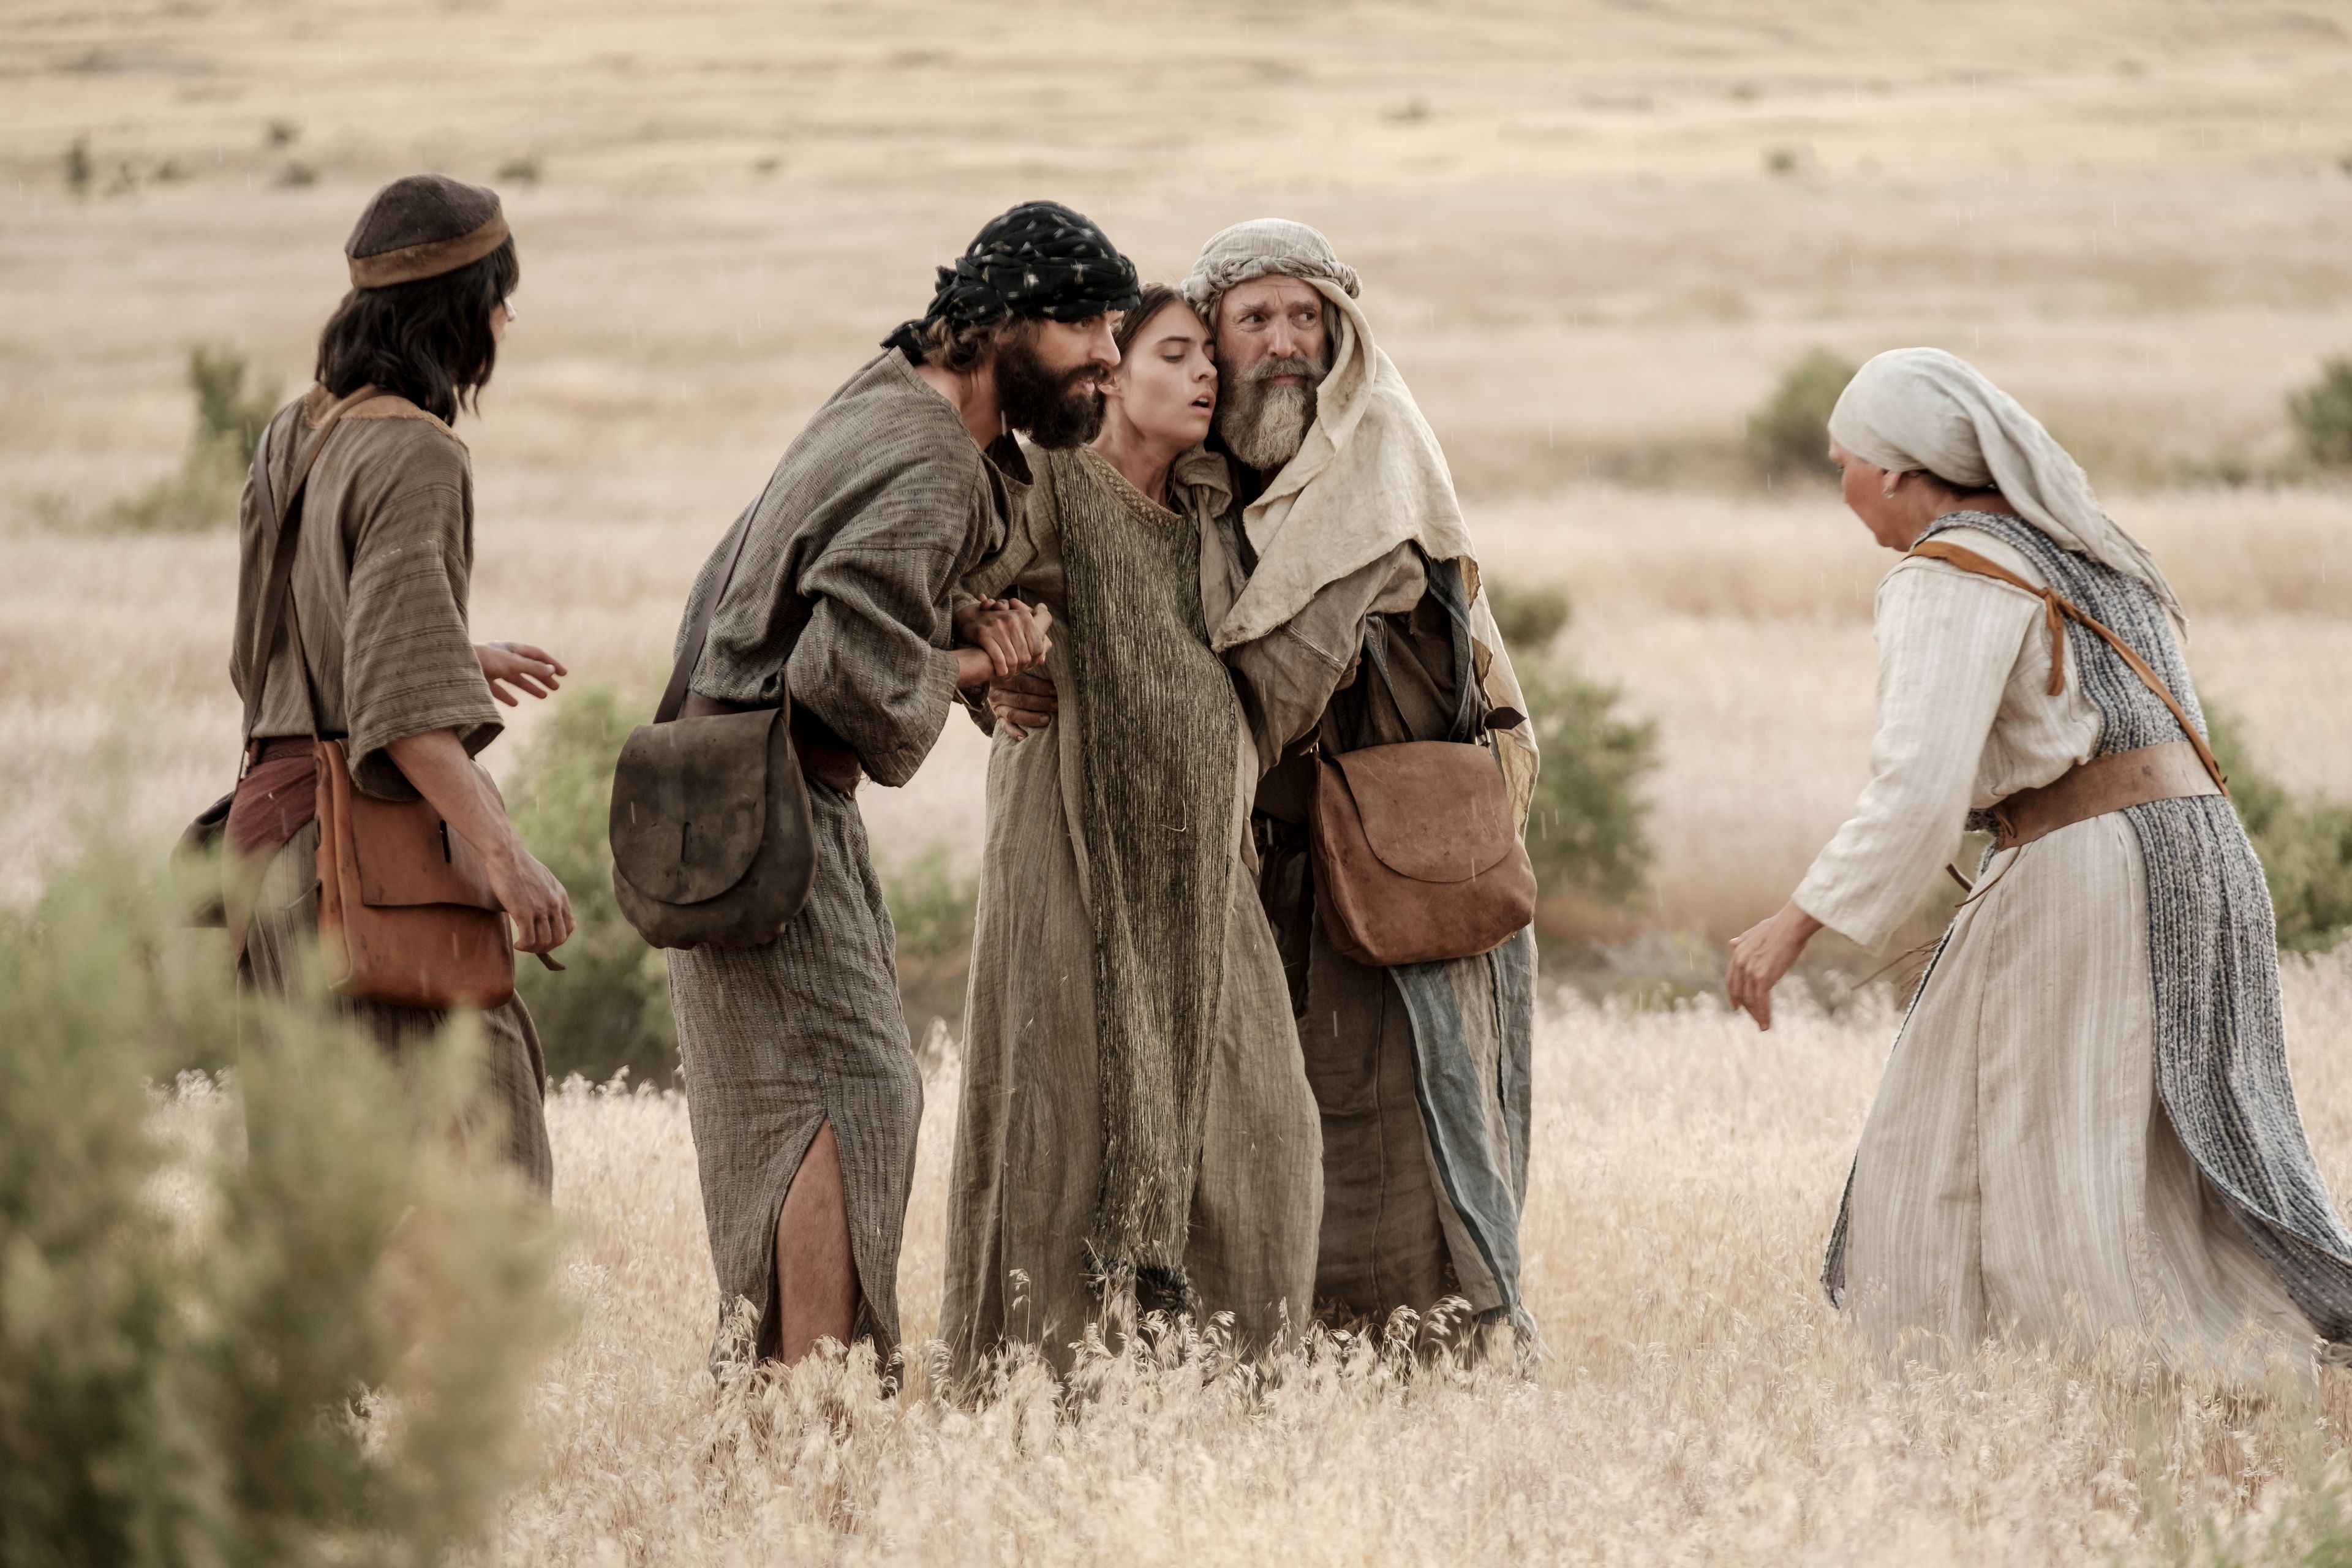 Lehi and one of Ishmael's sons help one of Ishmael's daughters in the wilderness.